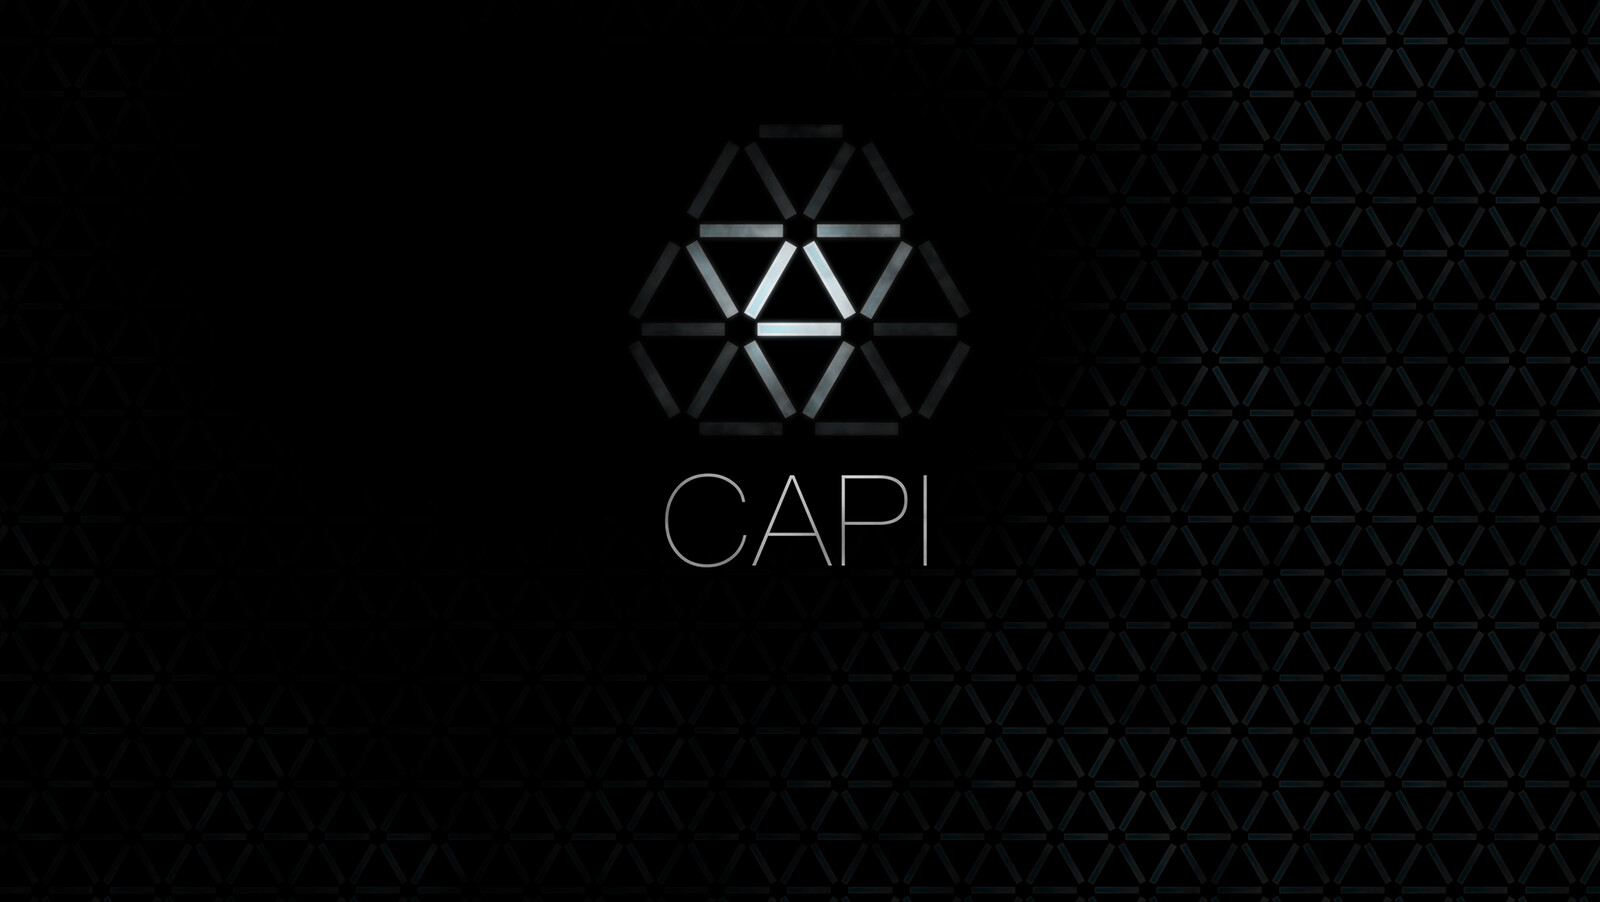 Branding made on commission for the Creator API project (CAPI)